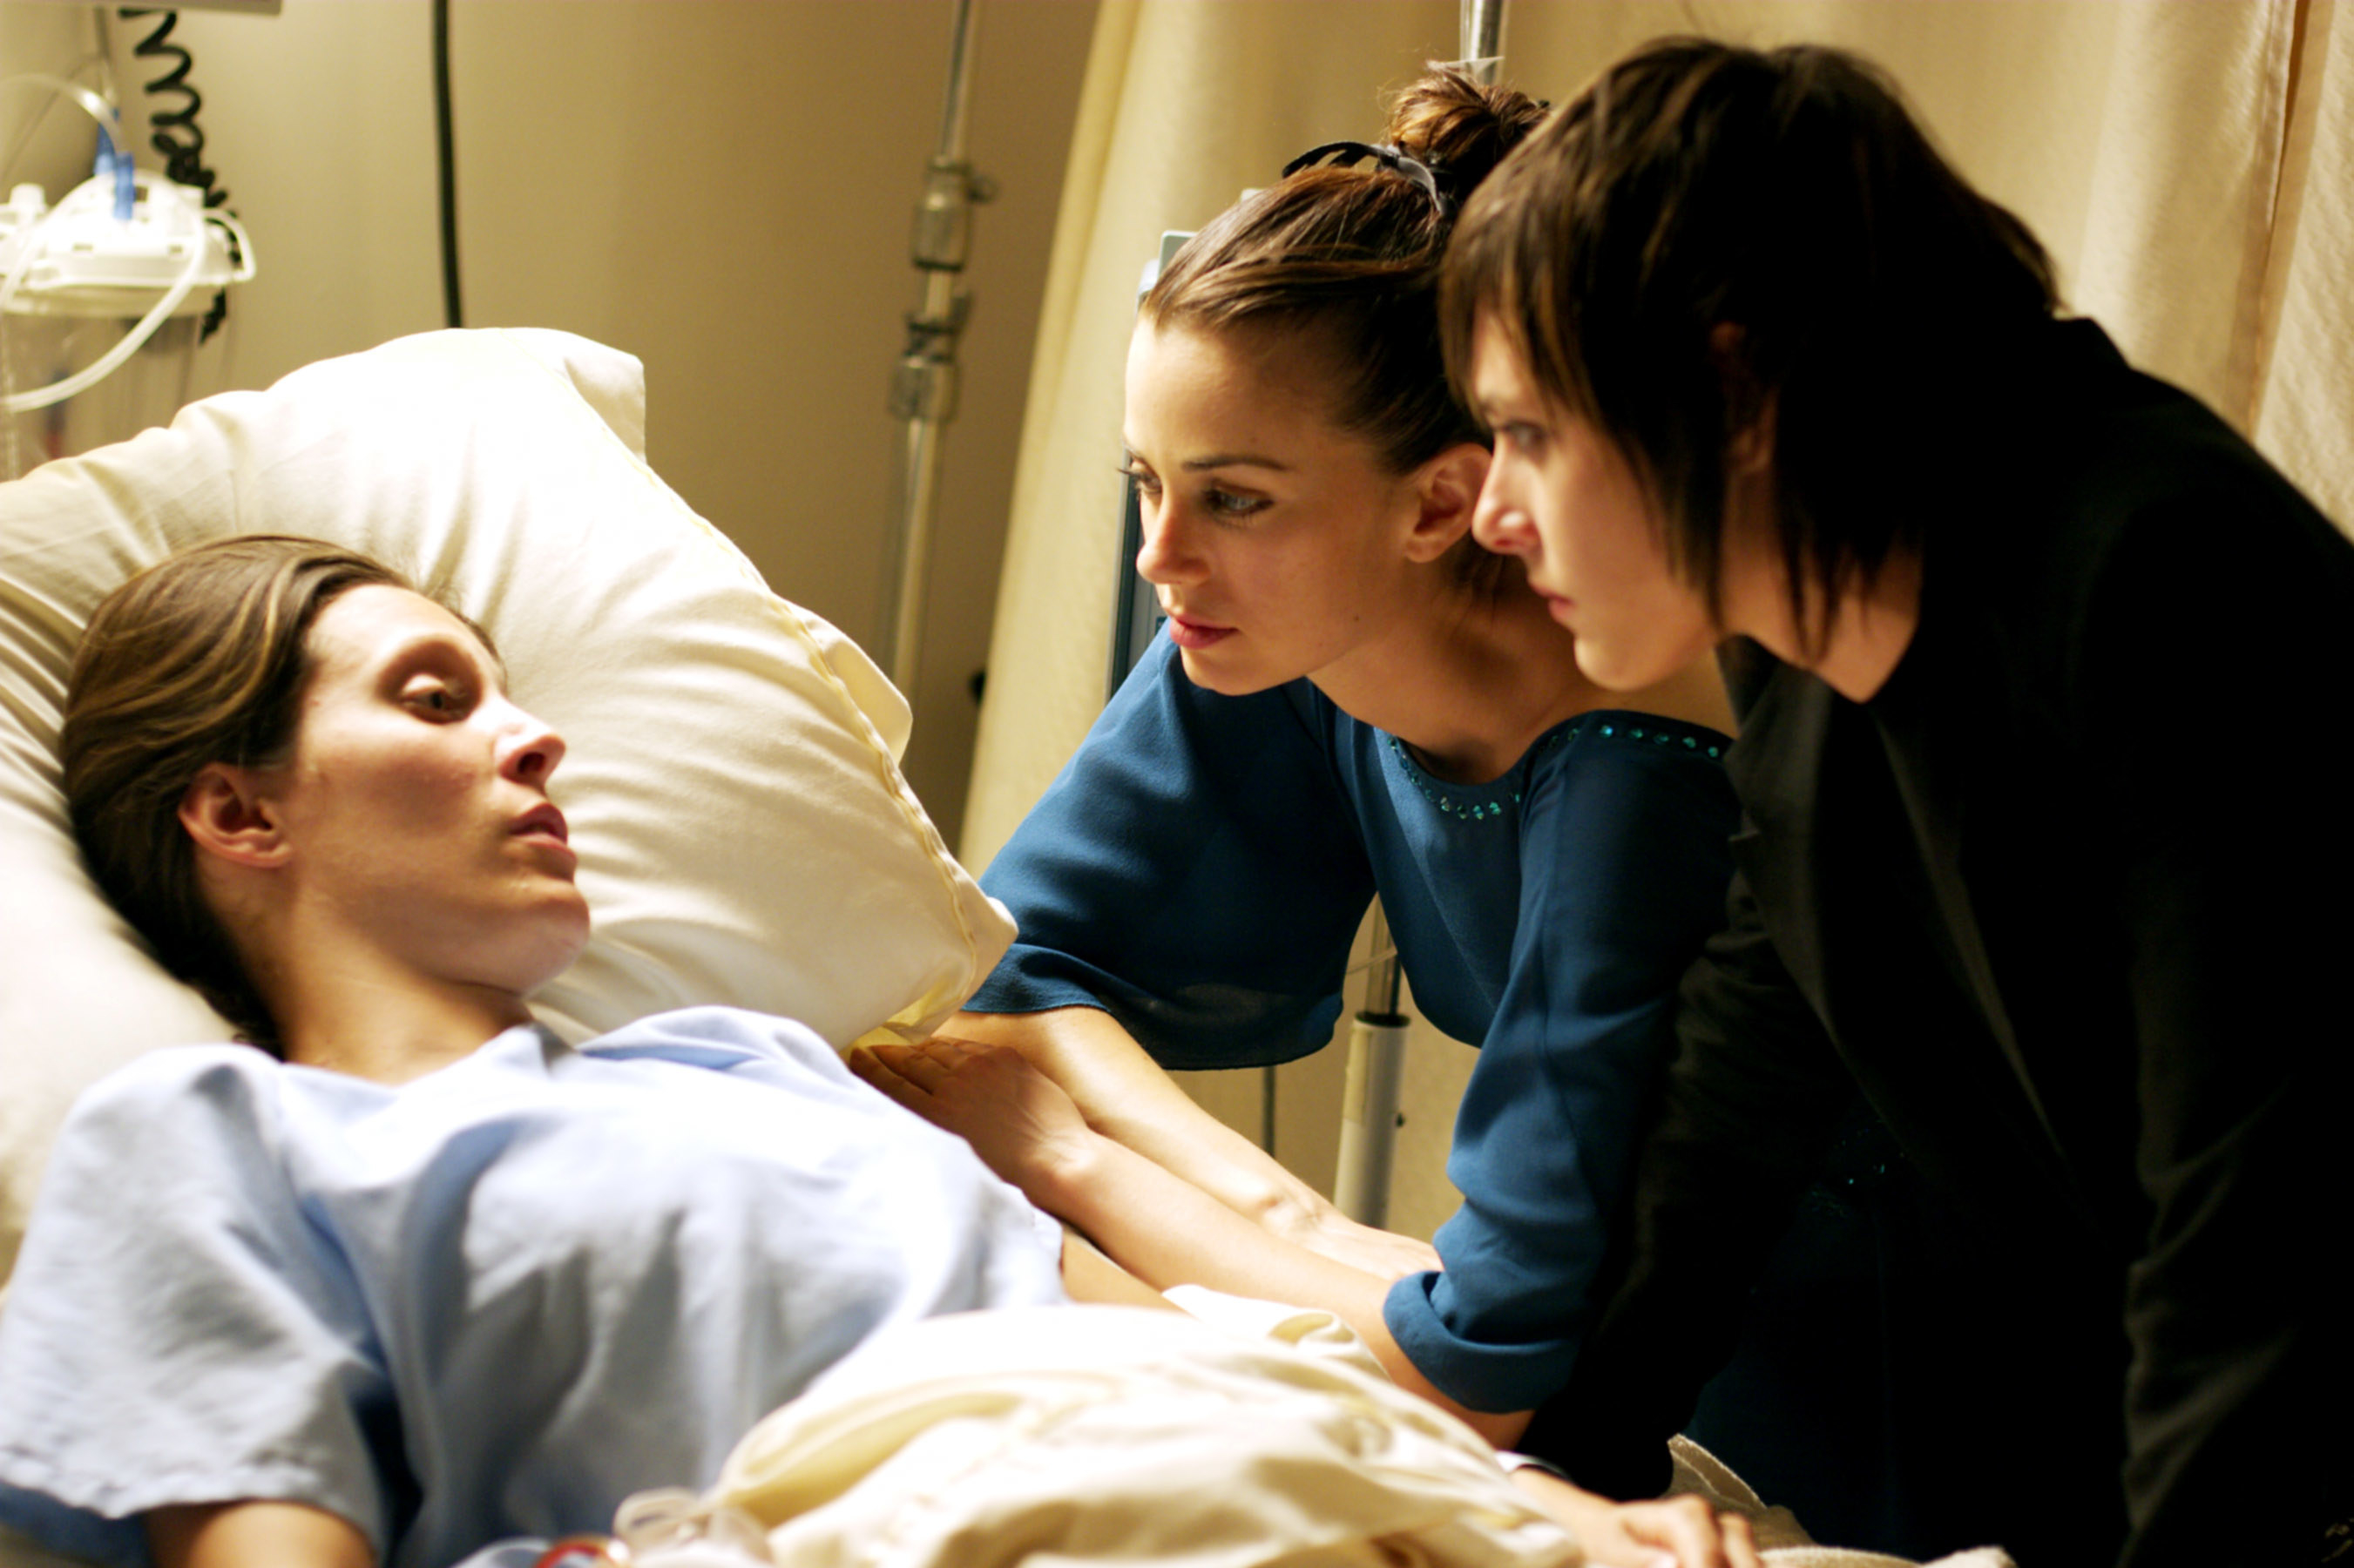 Dana in the hospital bed with her friends beside her